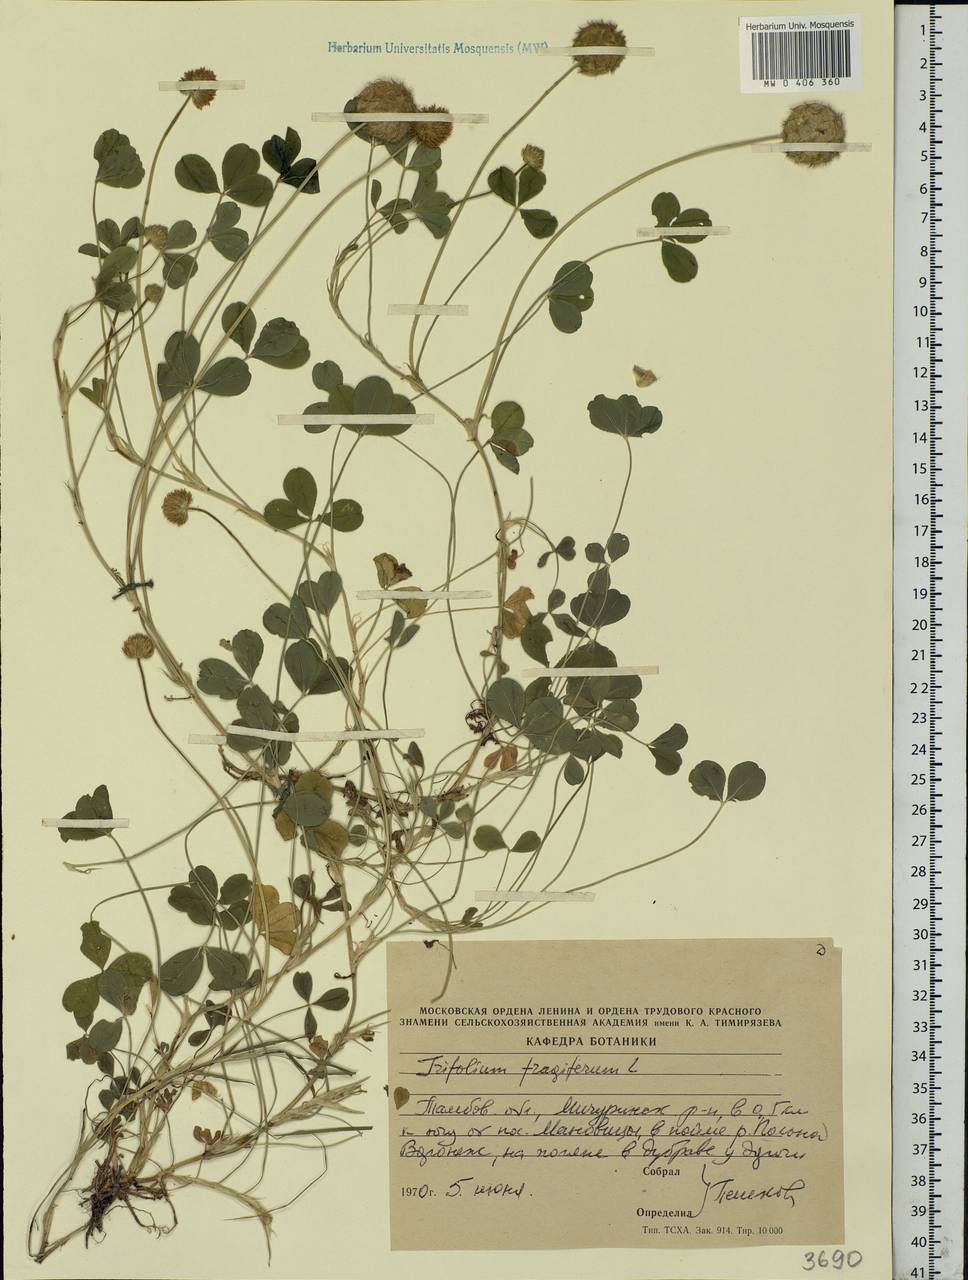 Trifolium fragiferum L., Eastern Europe, Central forest-and-steppe region (E6) (Russia)